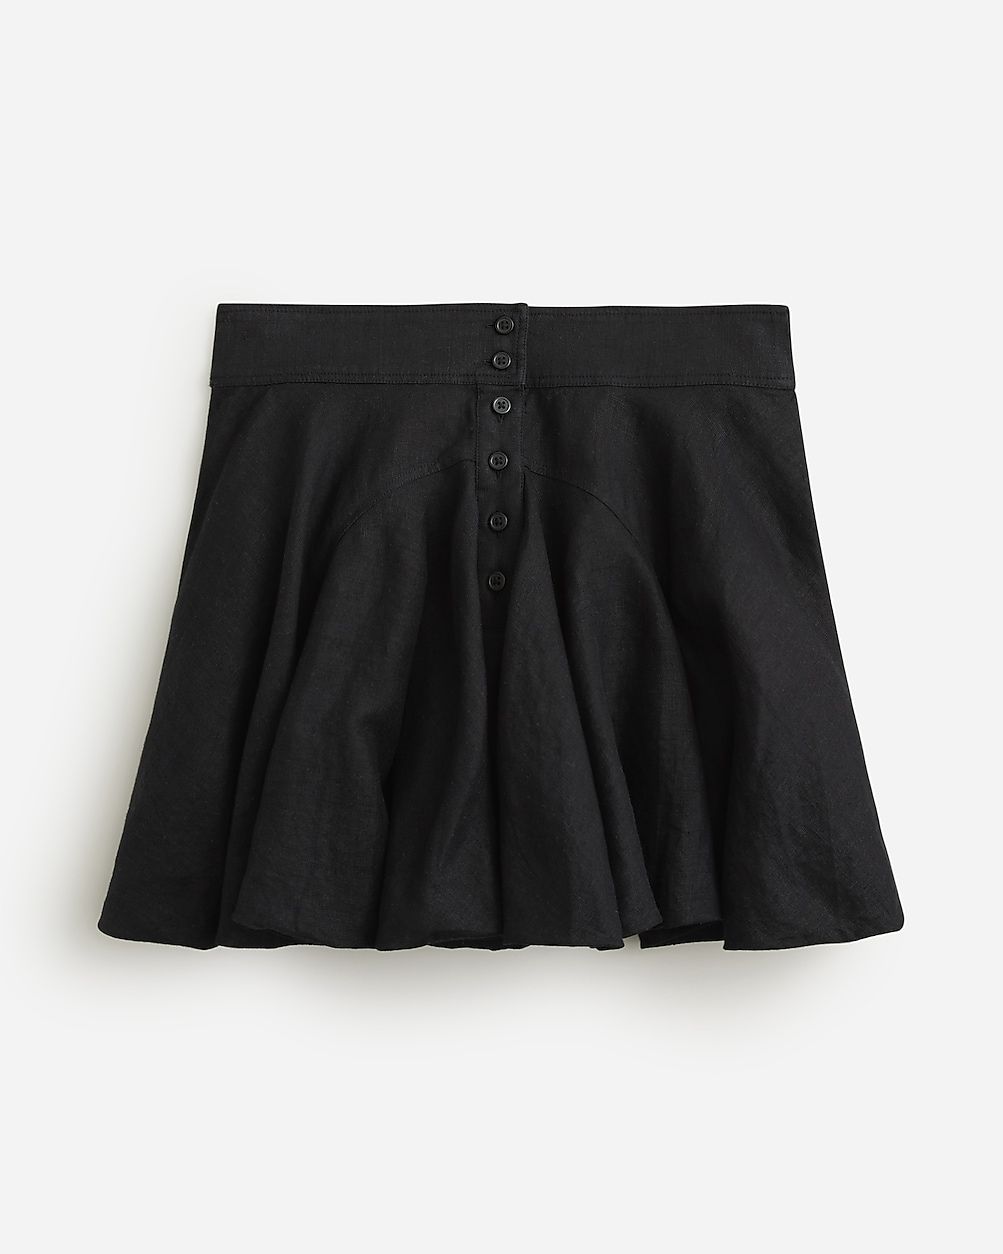 new2.0(1 REVIEWS)Button-up mini skirt in linen$118.0030% off full price with code SHOP30Black8Siz... | J.Crew US